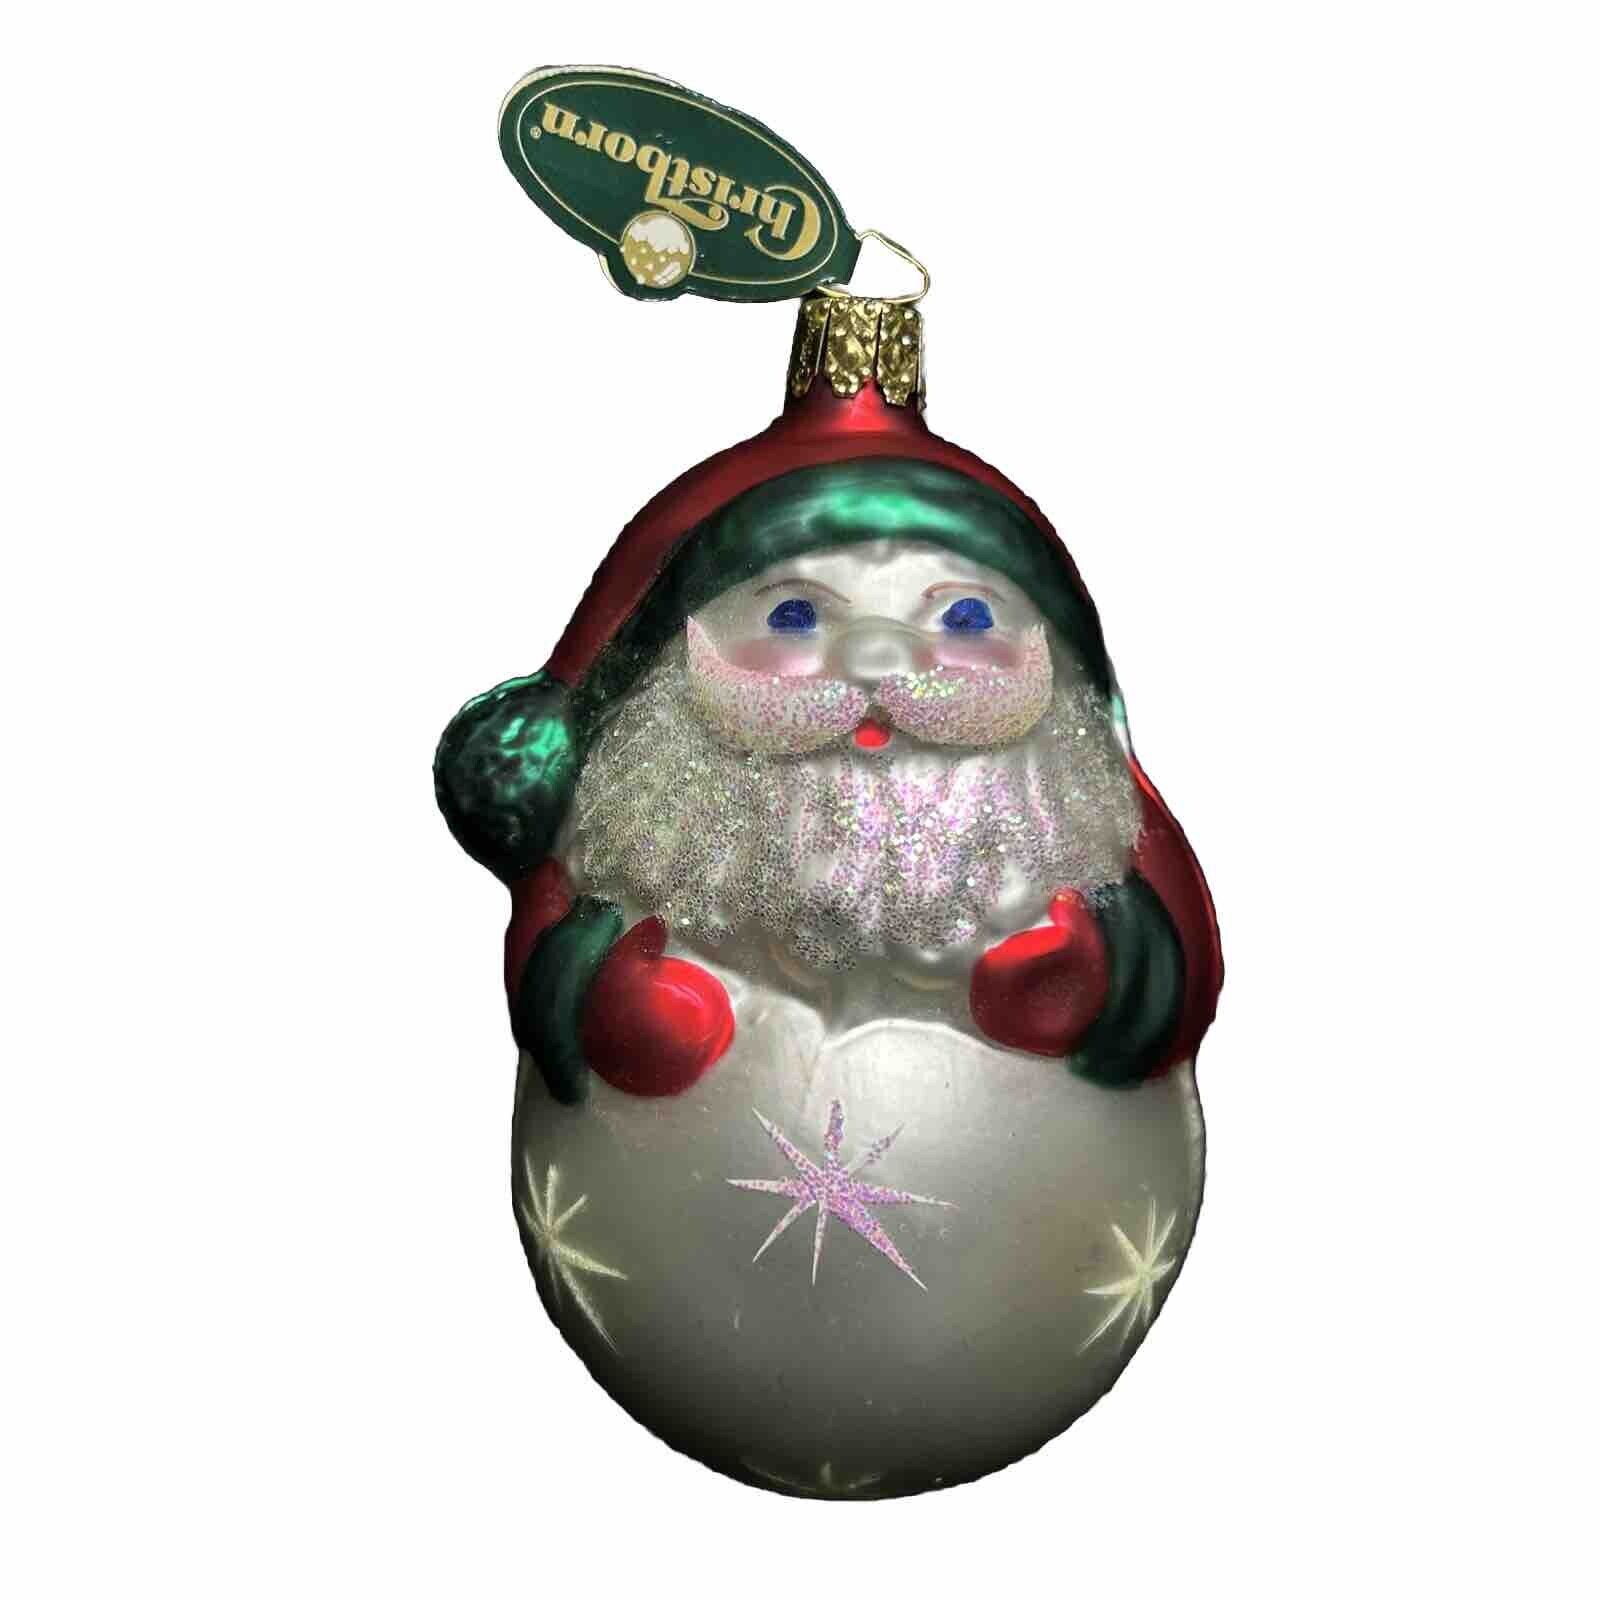 Vintage Christborn Blown Glass Santa Claus Ornament Made in Germany W/ Tag